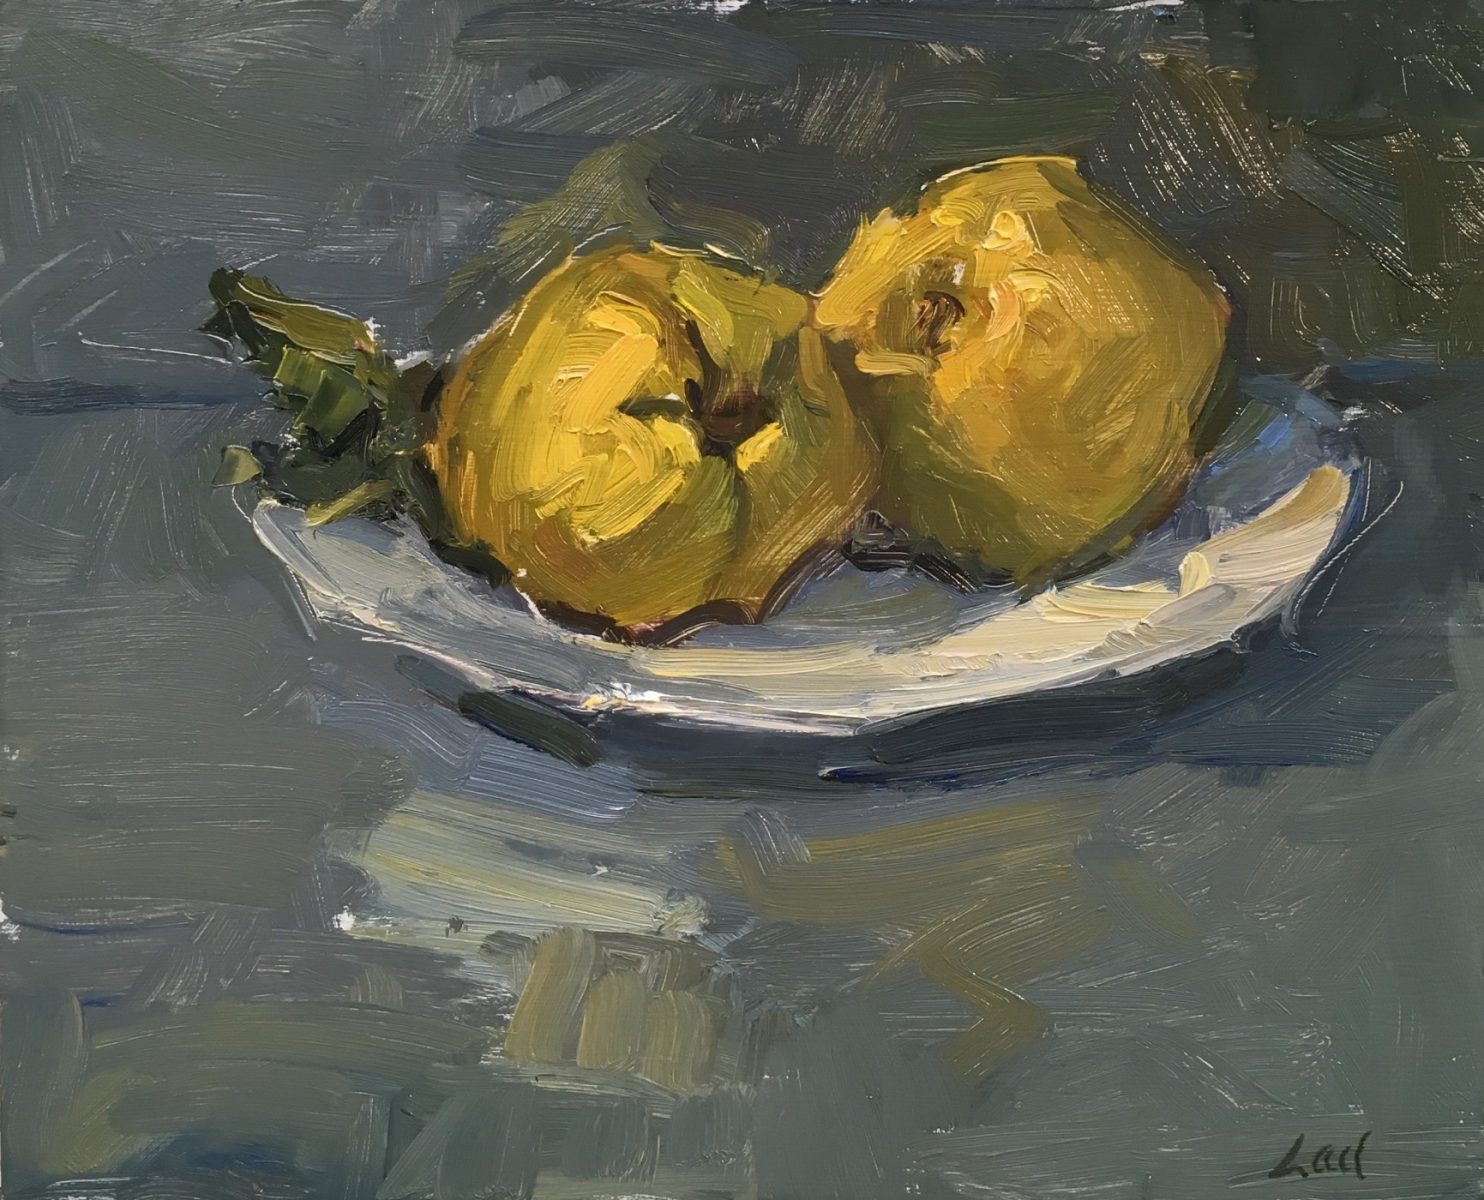 Still life of two quince on plate by Lael Weyenberg